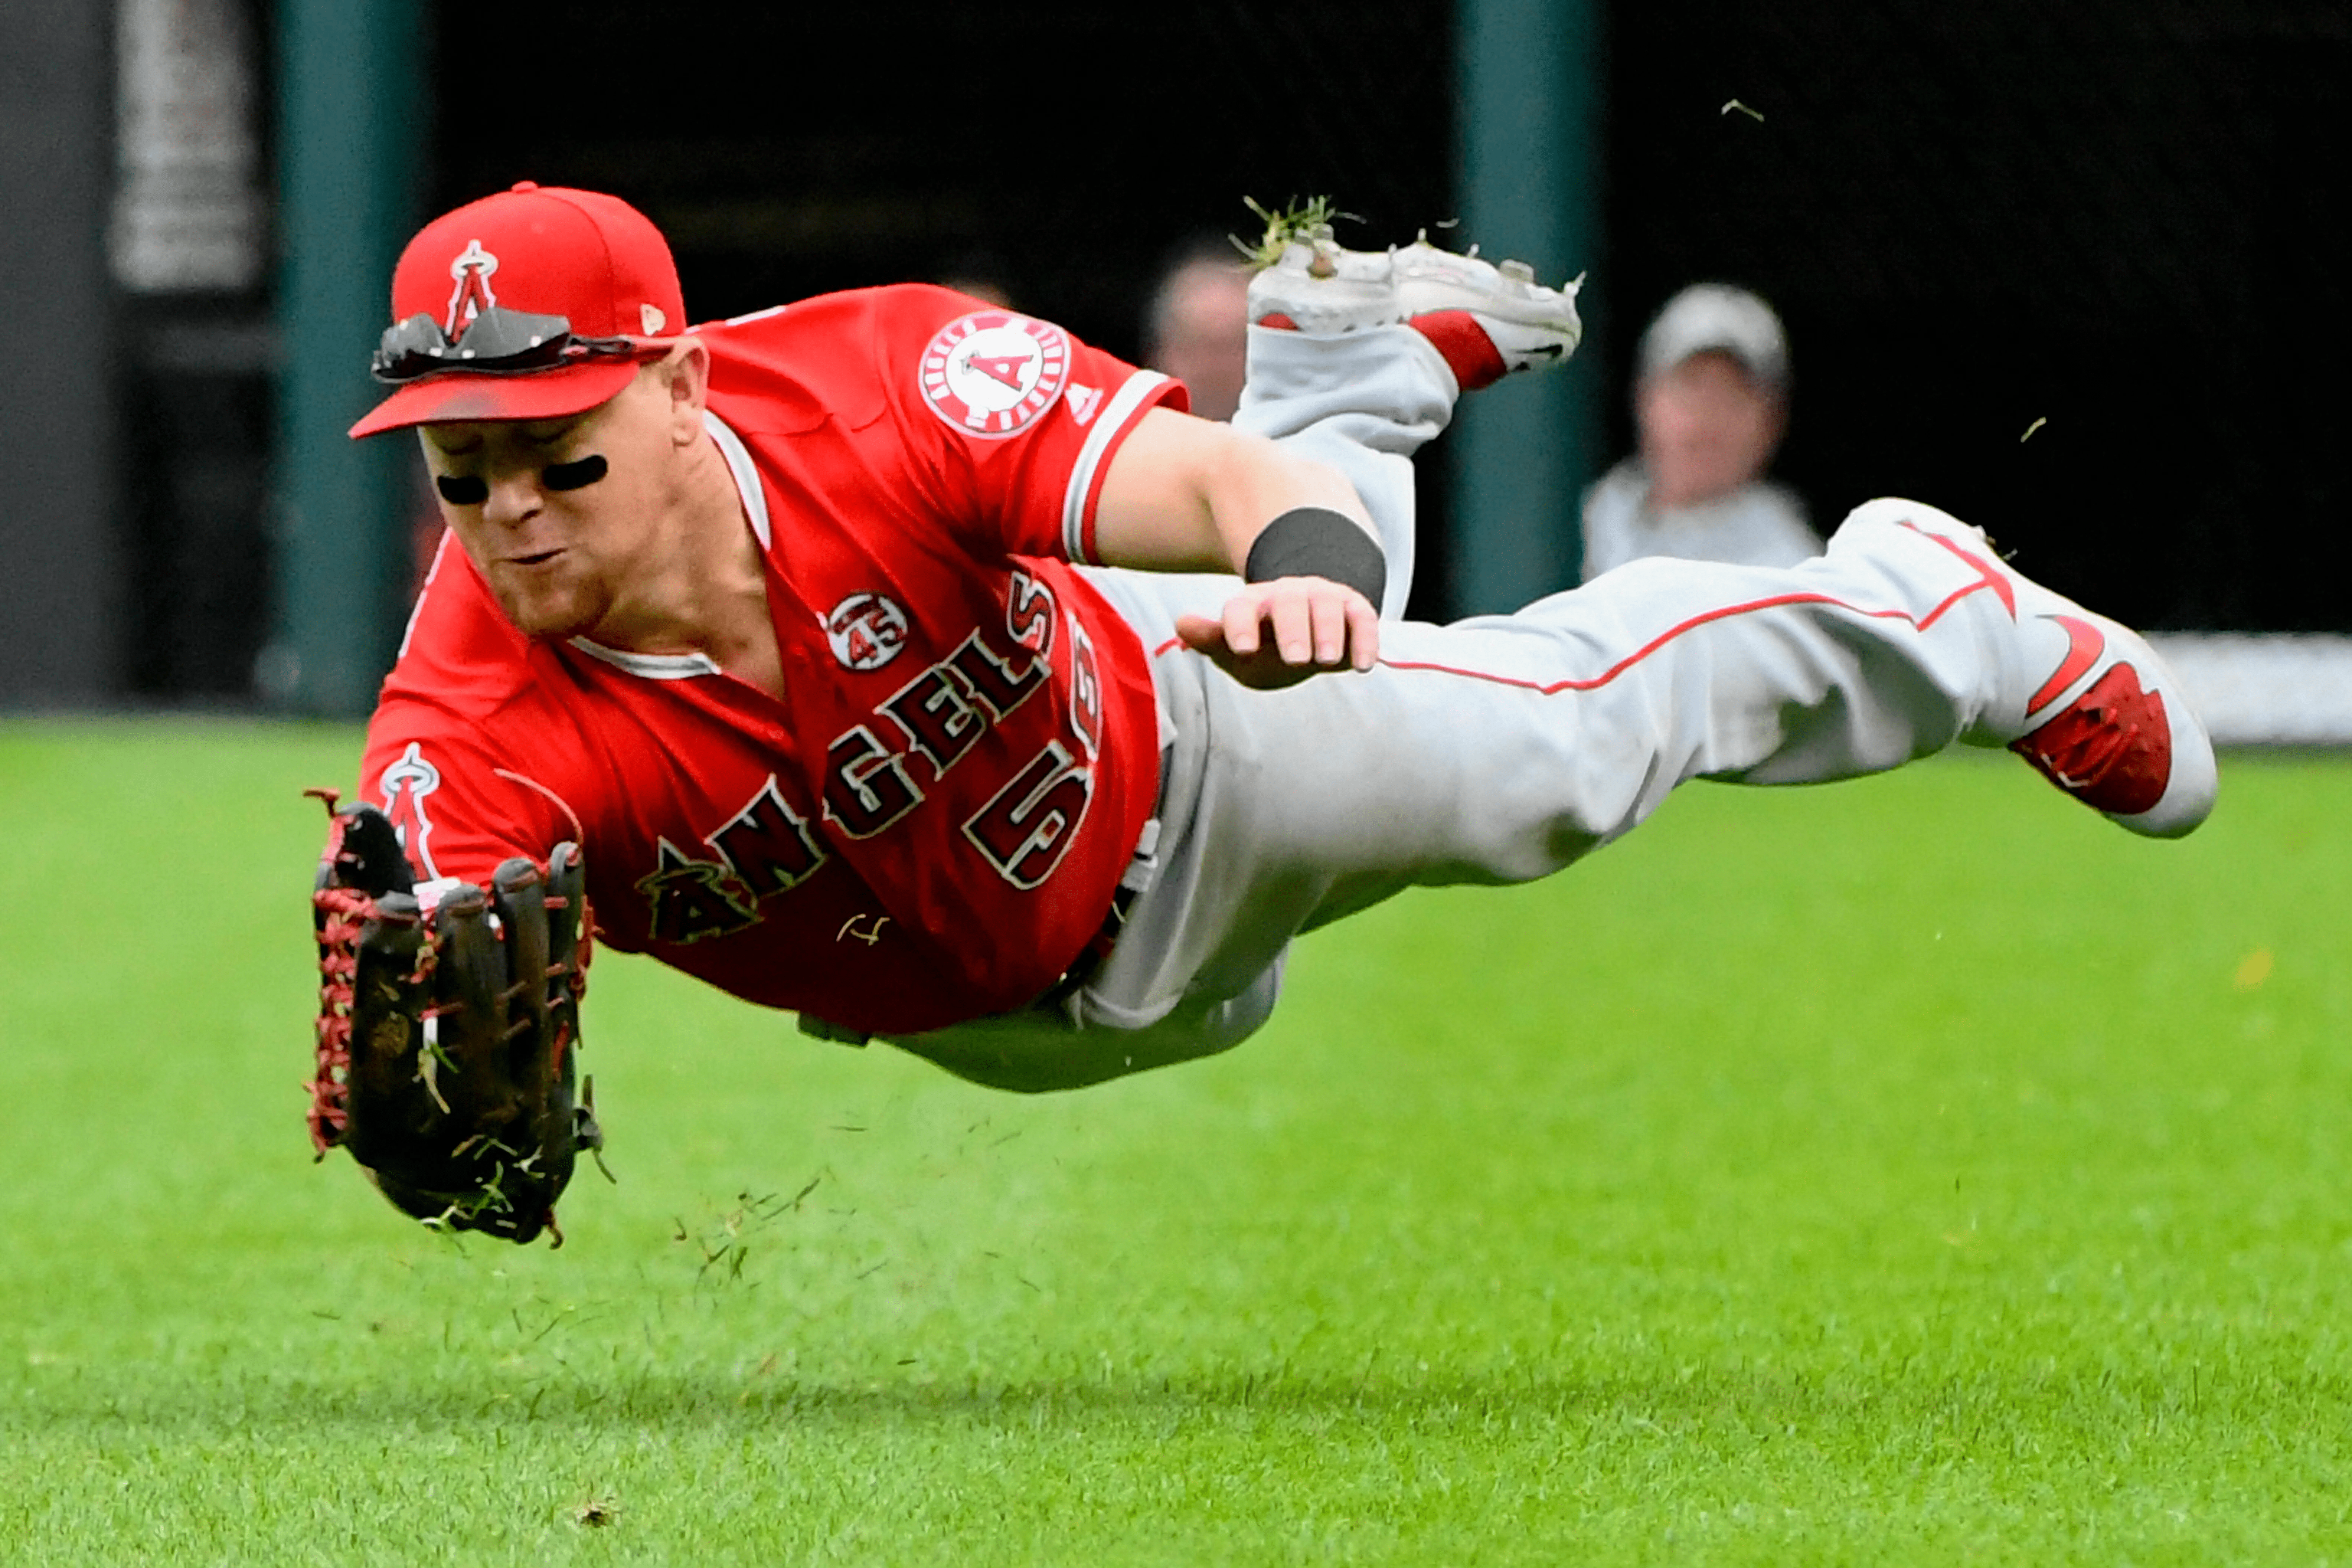 Are Yankees Right To Sign Ex-Angels Outfielder Kole Calhoun?